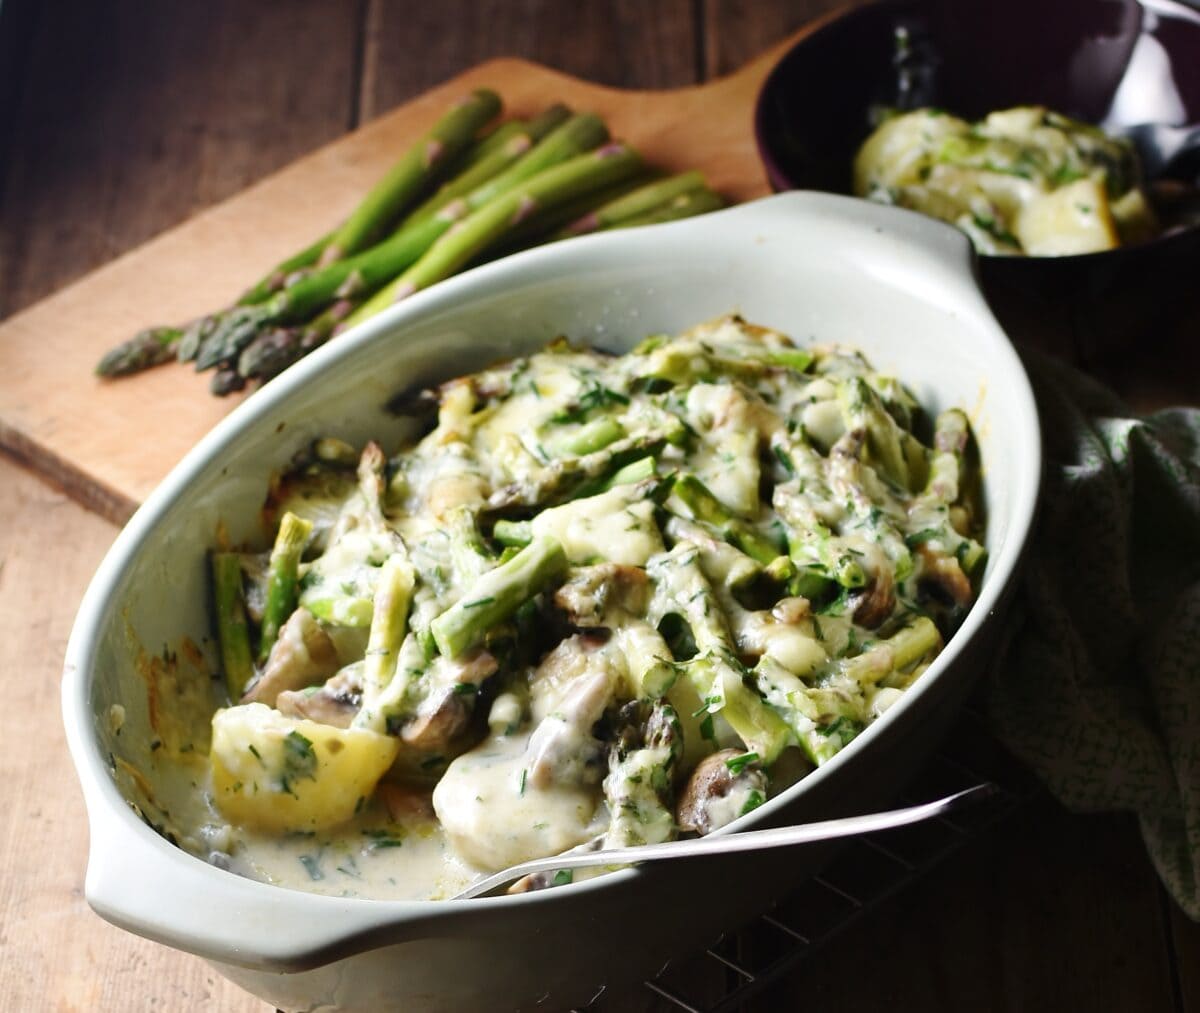 Side view of asparagus mushroom casserole with potatoes and spoon in oval dish, with asparagus tips in background.